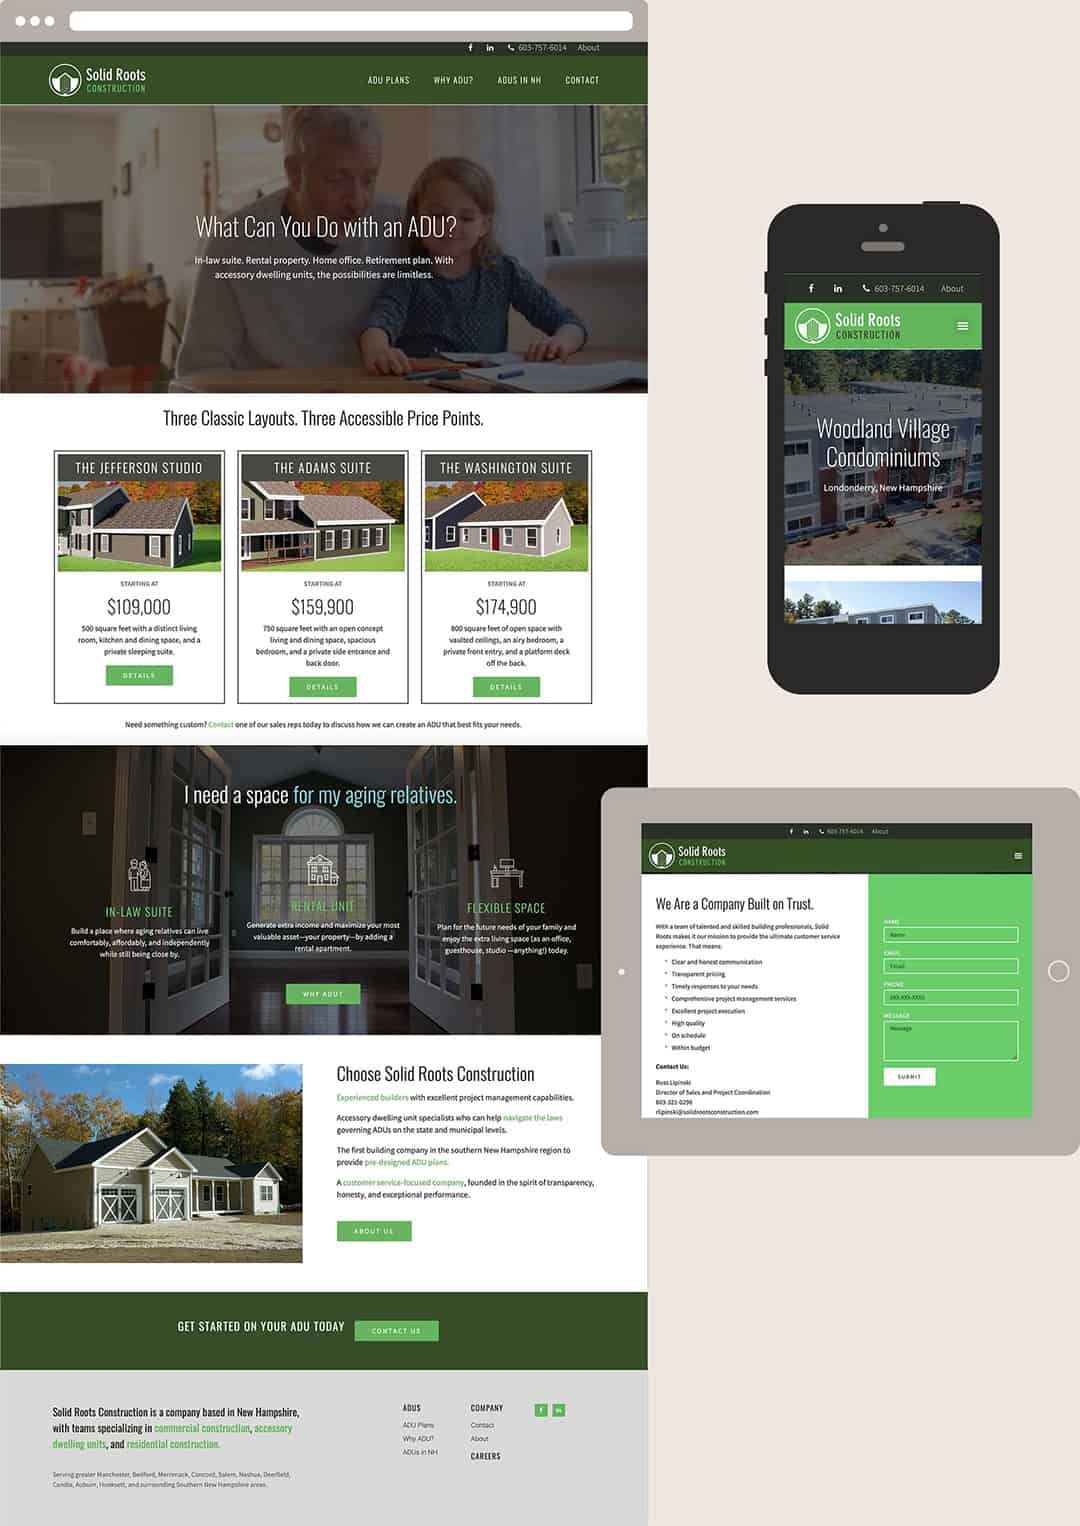 Browser, mobile, and tablet website screens for Solid Roots Construction